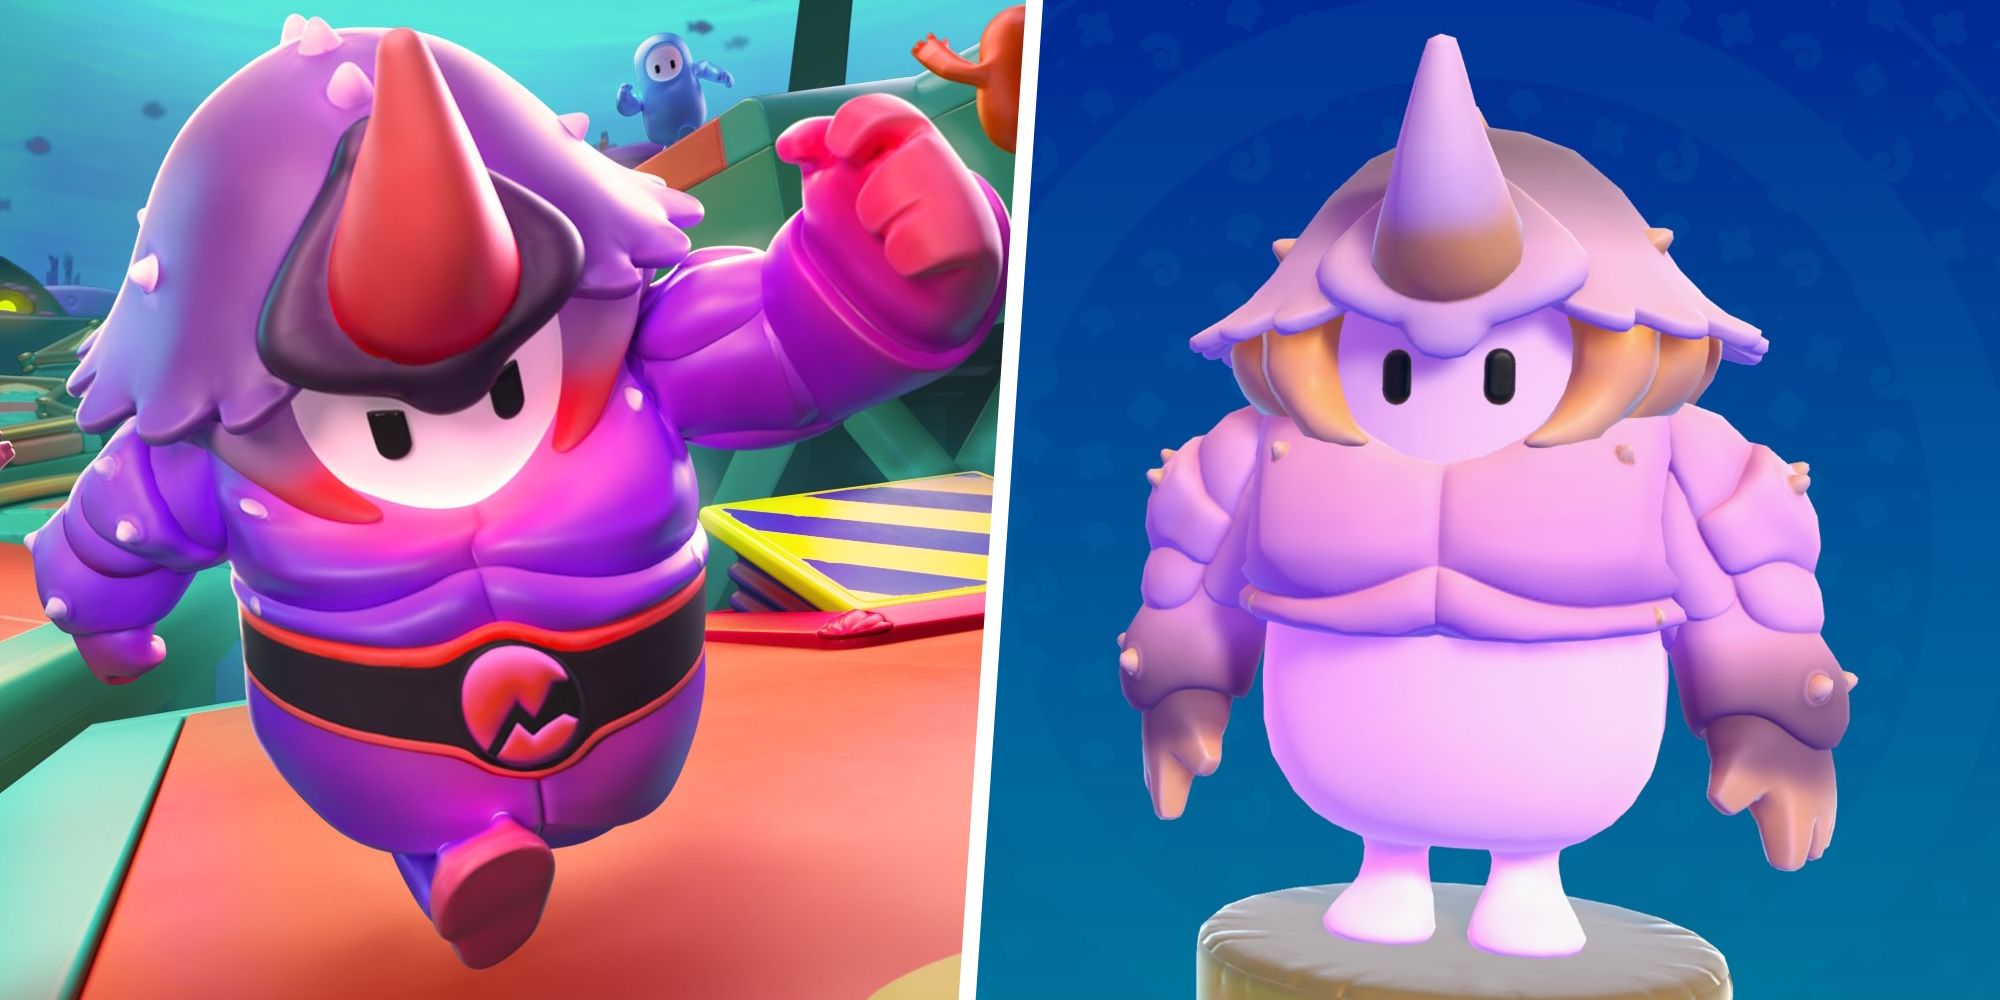 Fall Guy with Level-Up Crustacean in purple split with a Fall Guy with Level-Up Crustacean in white